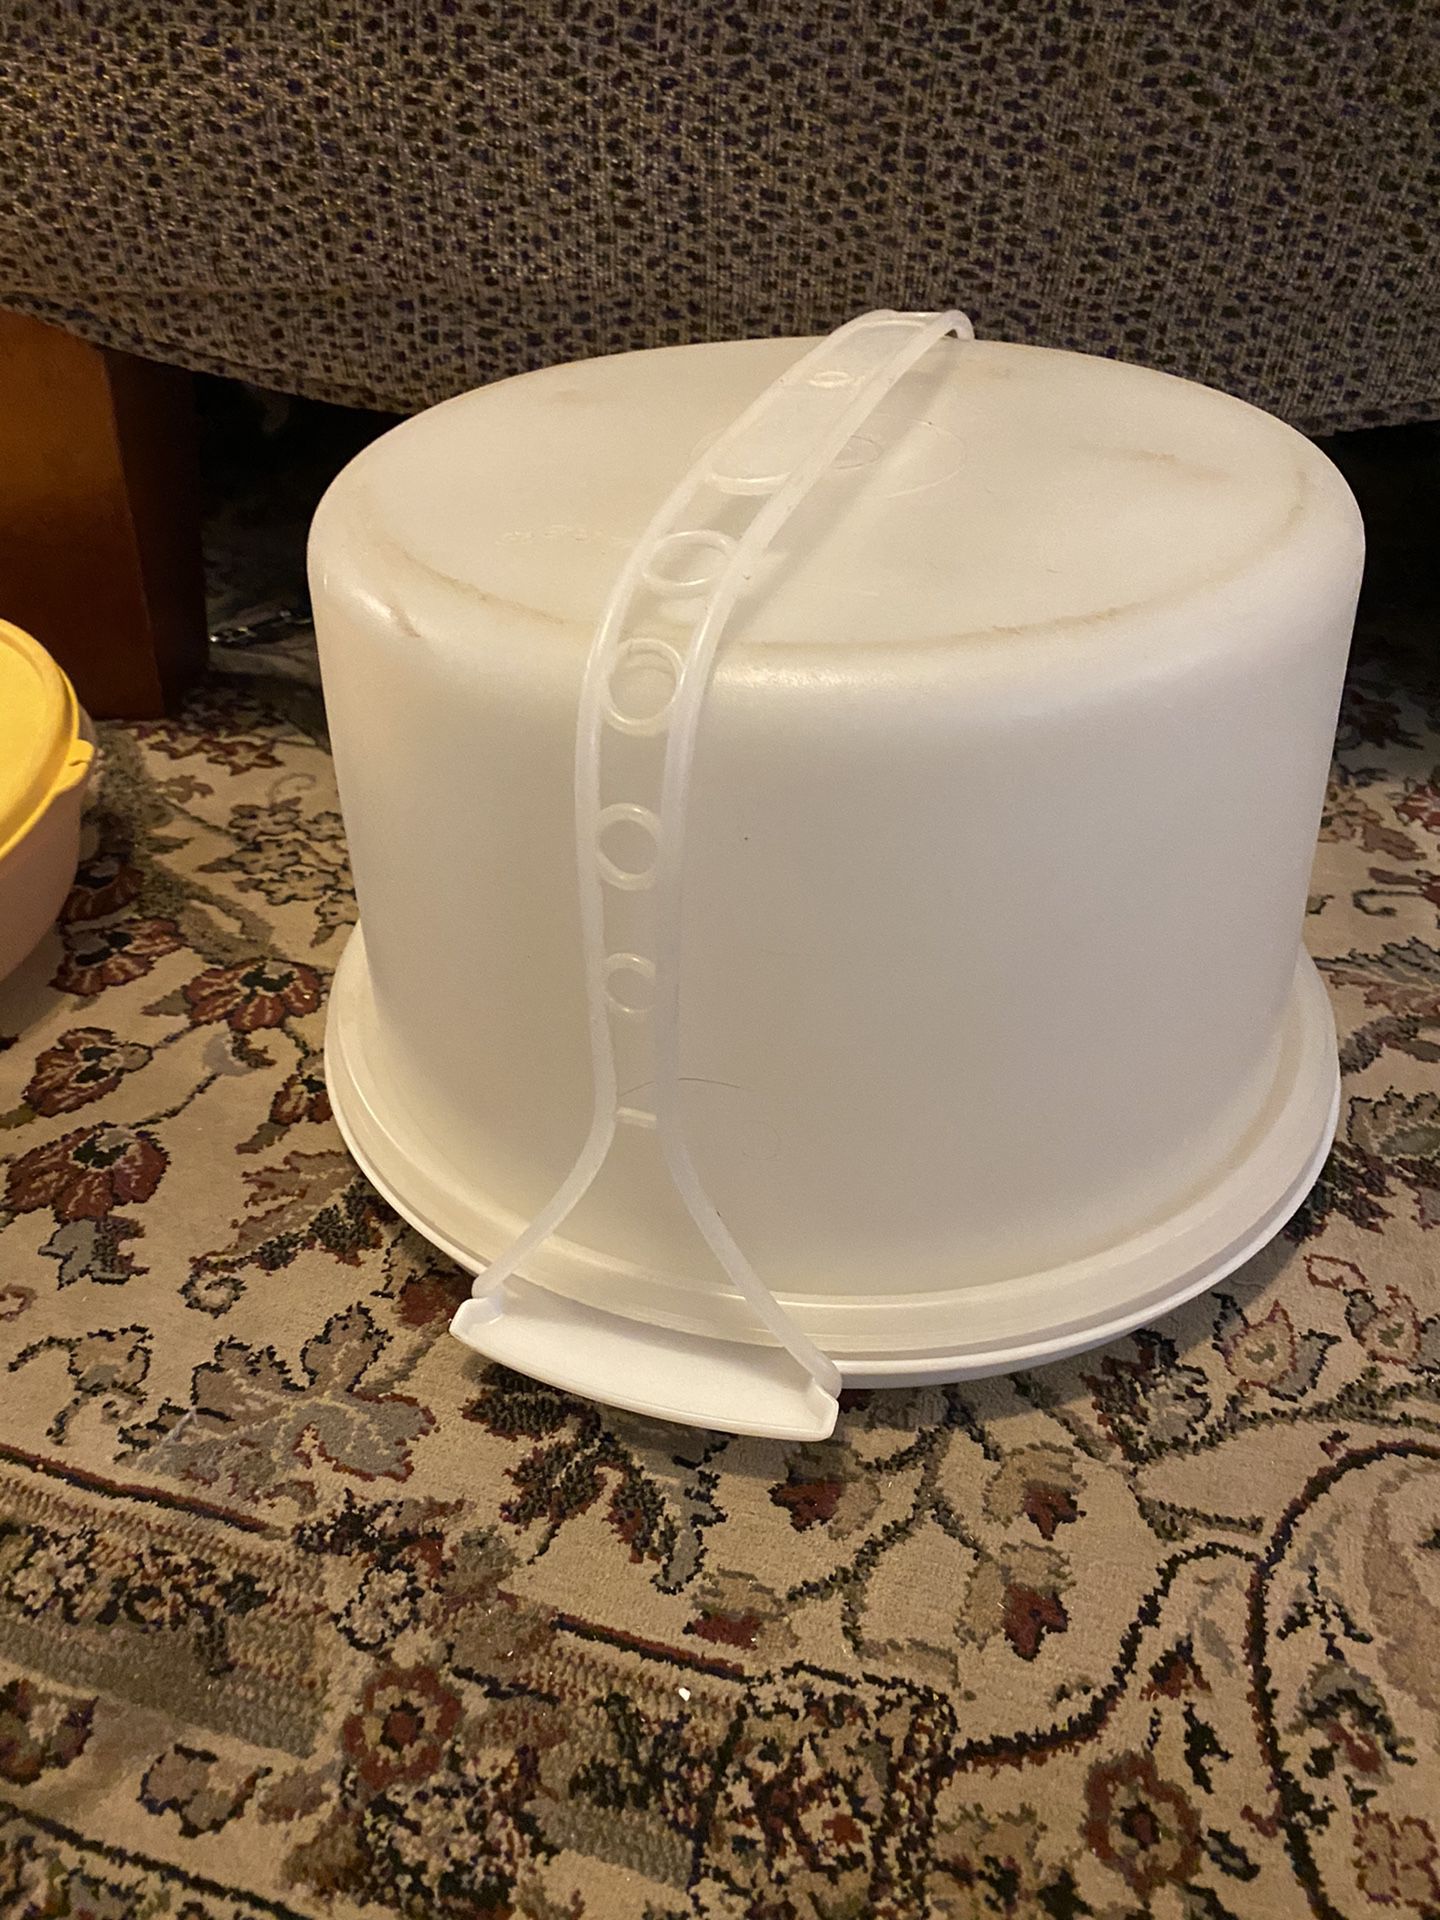 Tupperware Vintage Cake Carrier for Sale in Peoria, AZ - OfferUp